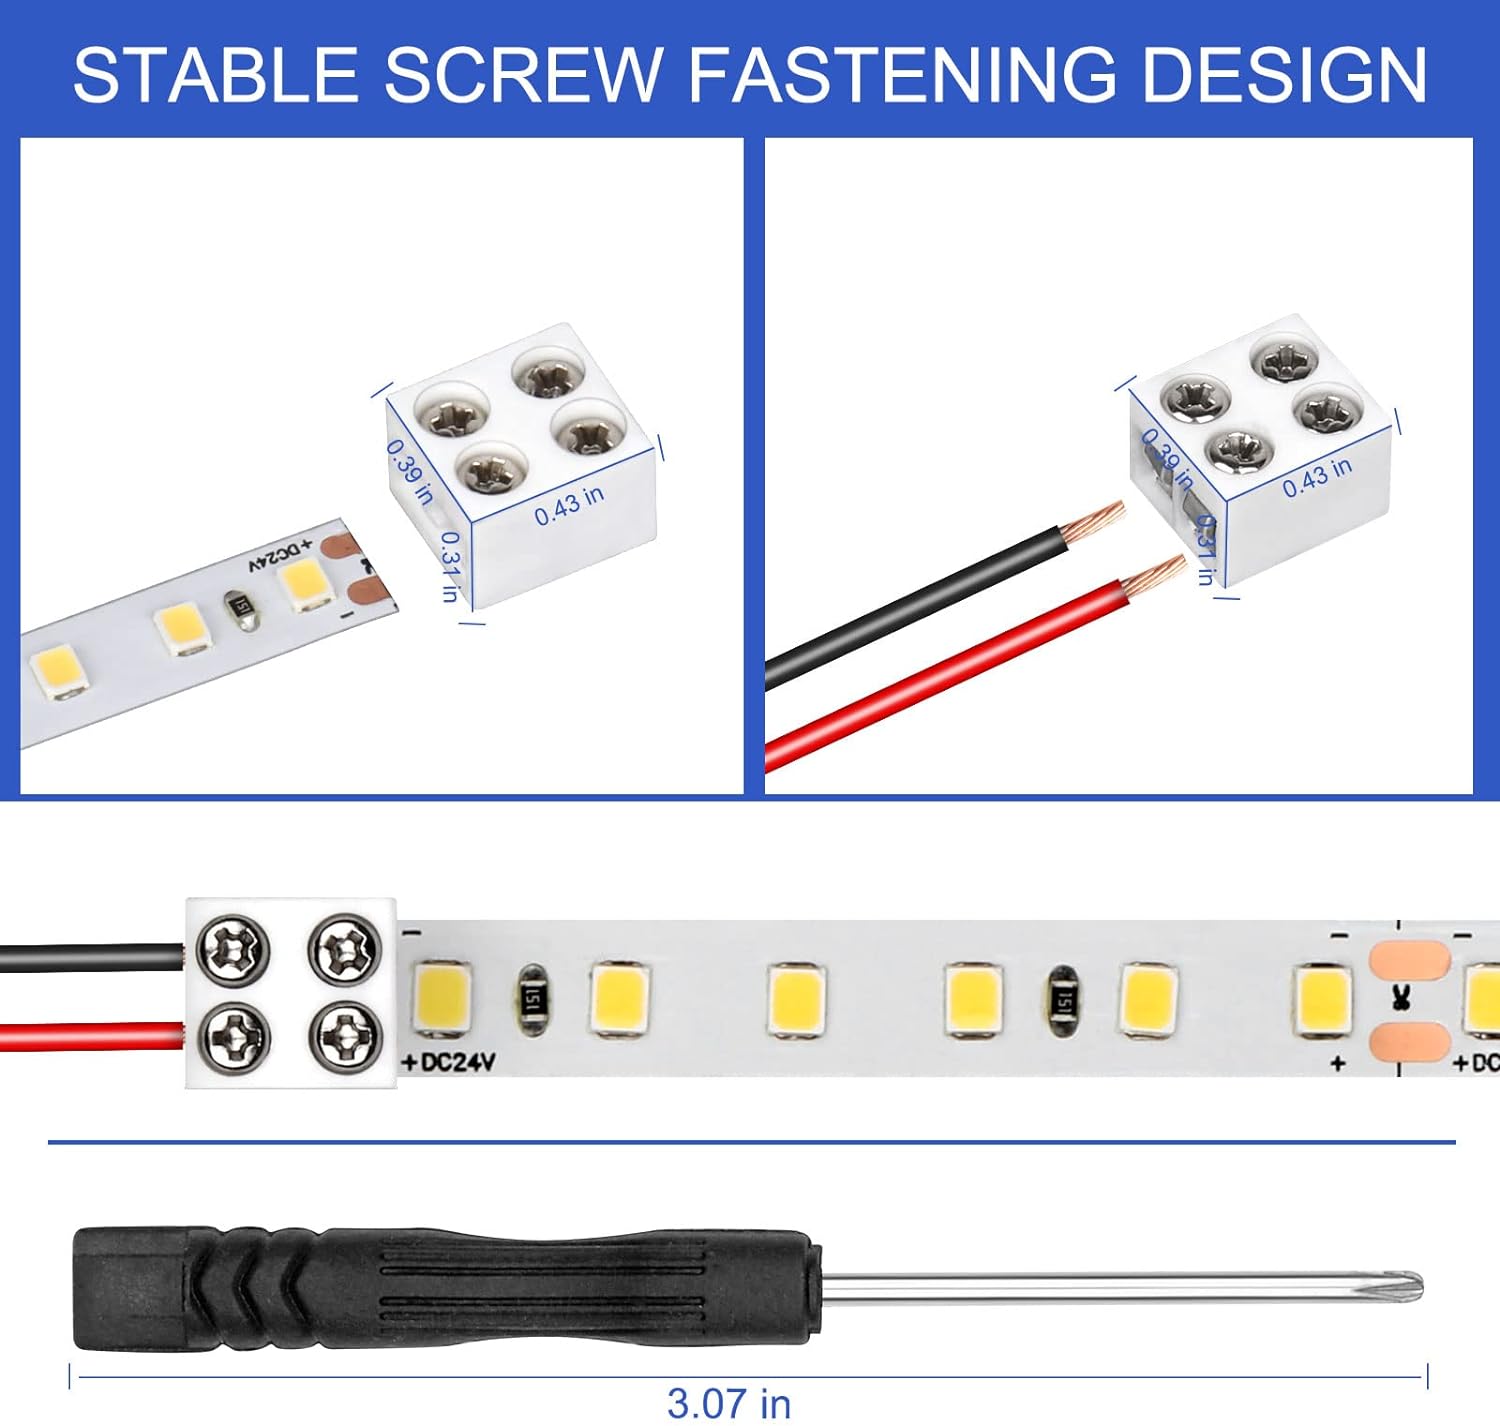 MILDWARM 40 Pack Solderless LED Strip Connectors, 2 Pin LED Connectors for 5V 12V 24V Low Voltage Strip Lights, Screw Down 8mm Tape to Wire, Easy-to-Install LED Tape Light Connector with Screwdriver